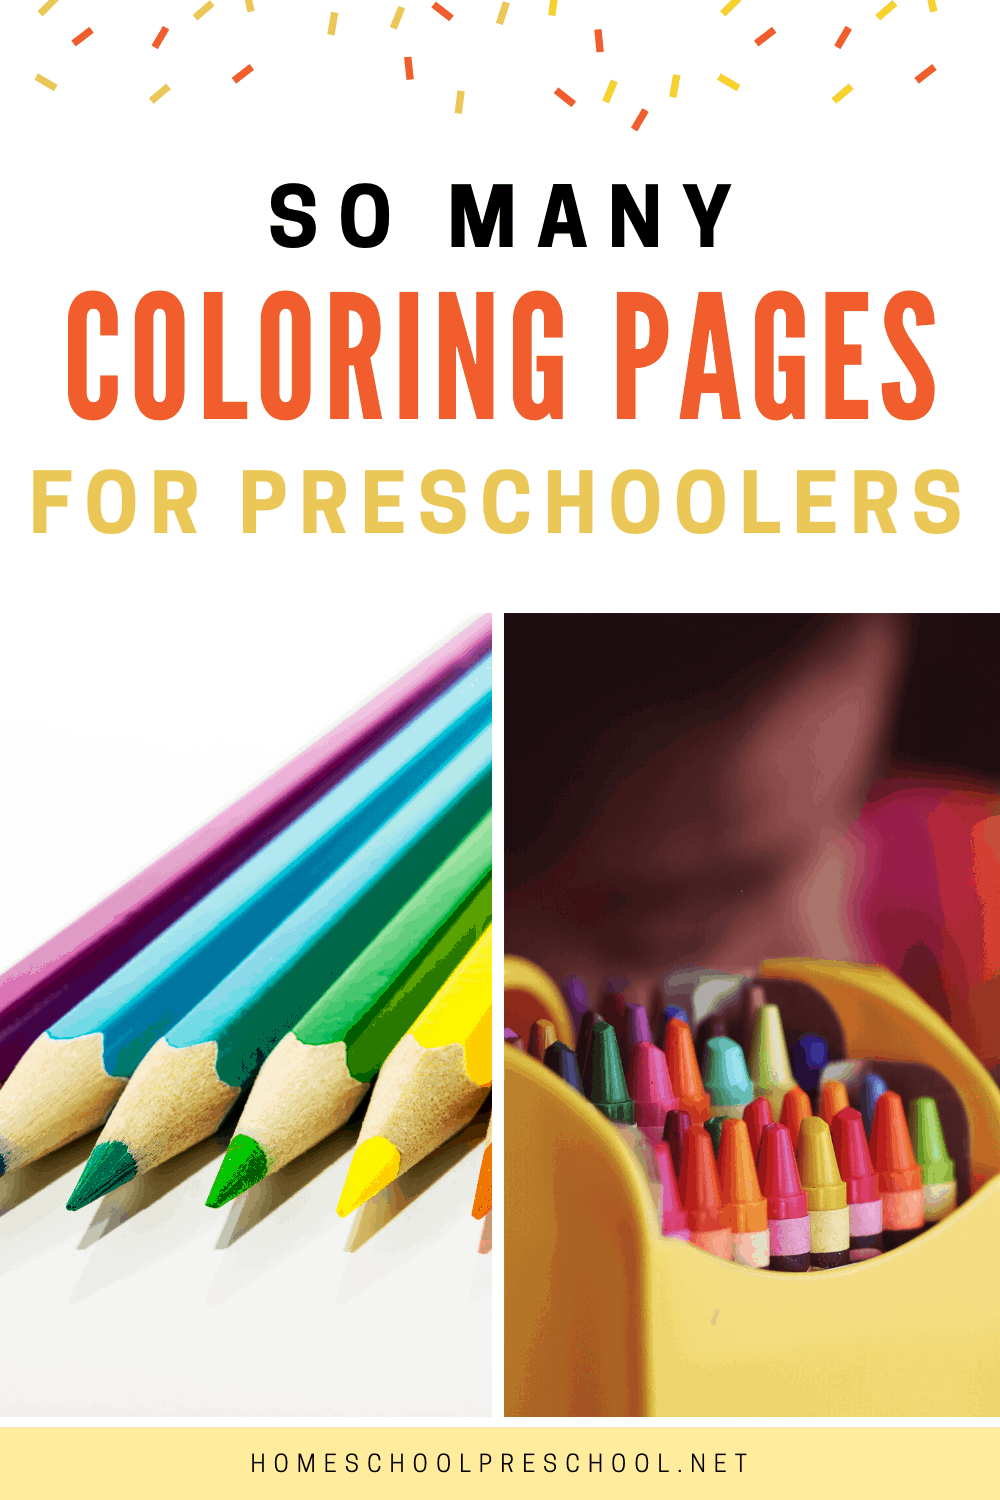 These Preschool Coloring Pages are the perfect addition to your preschool unit studies or quiet time activities. Don't miss these awesome free printables!